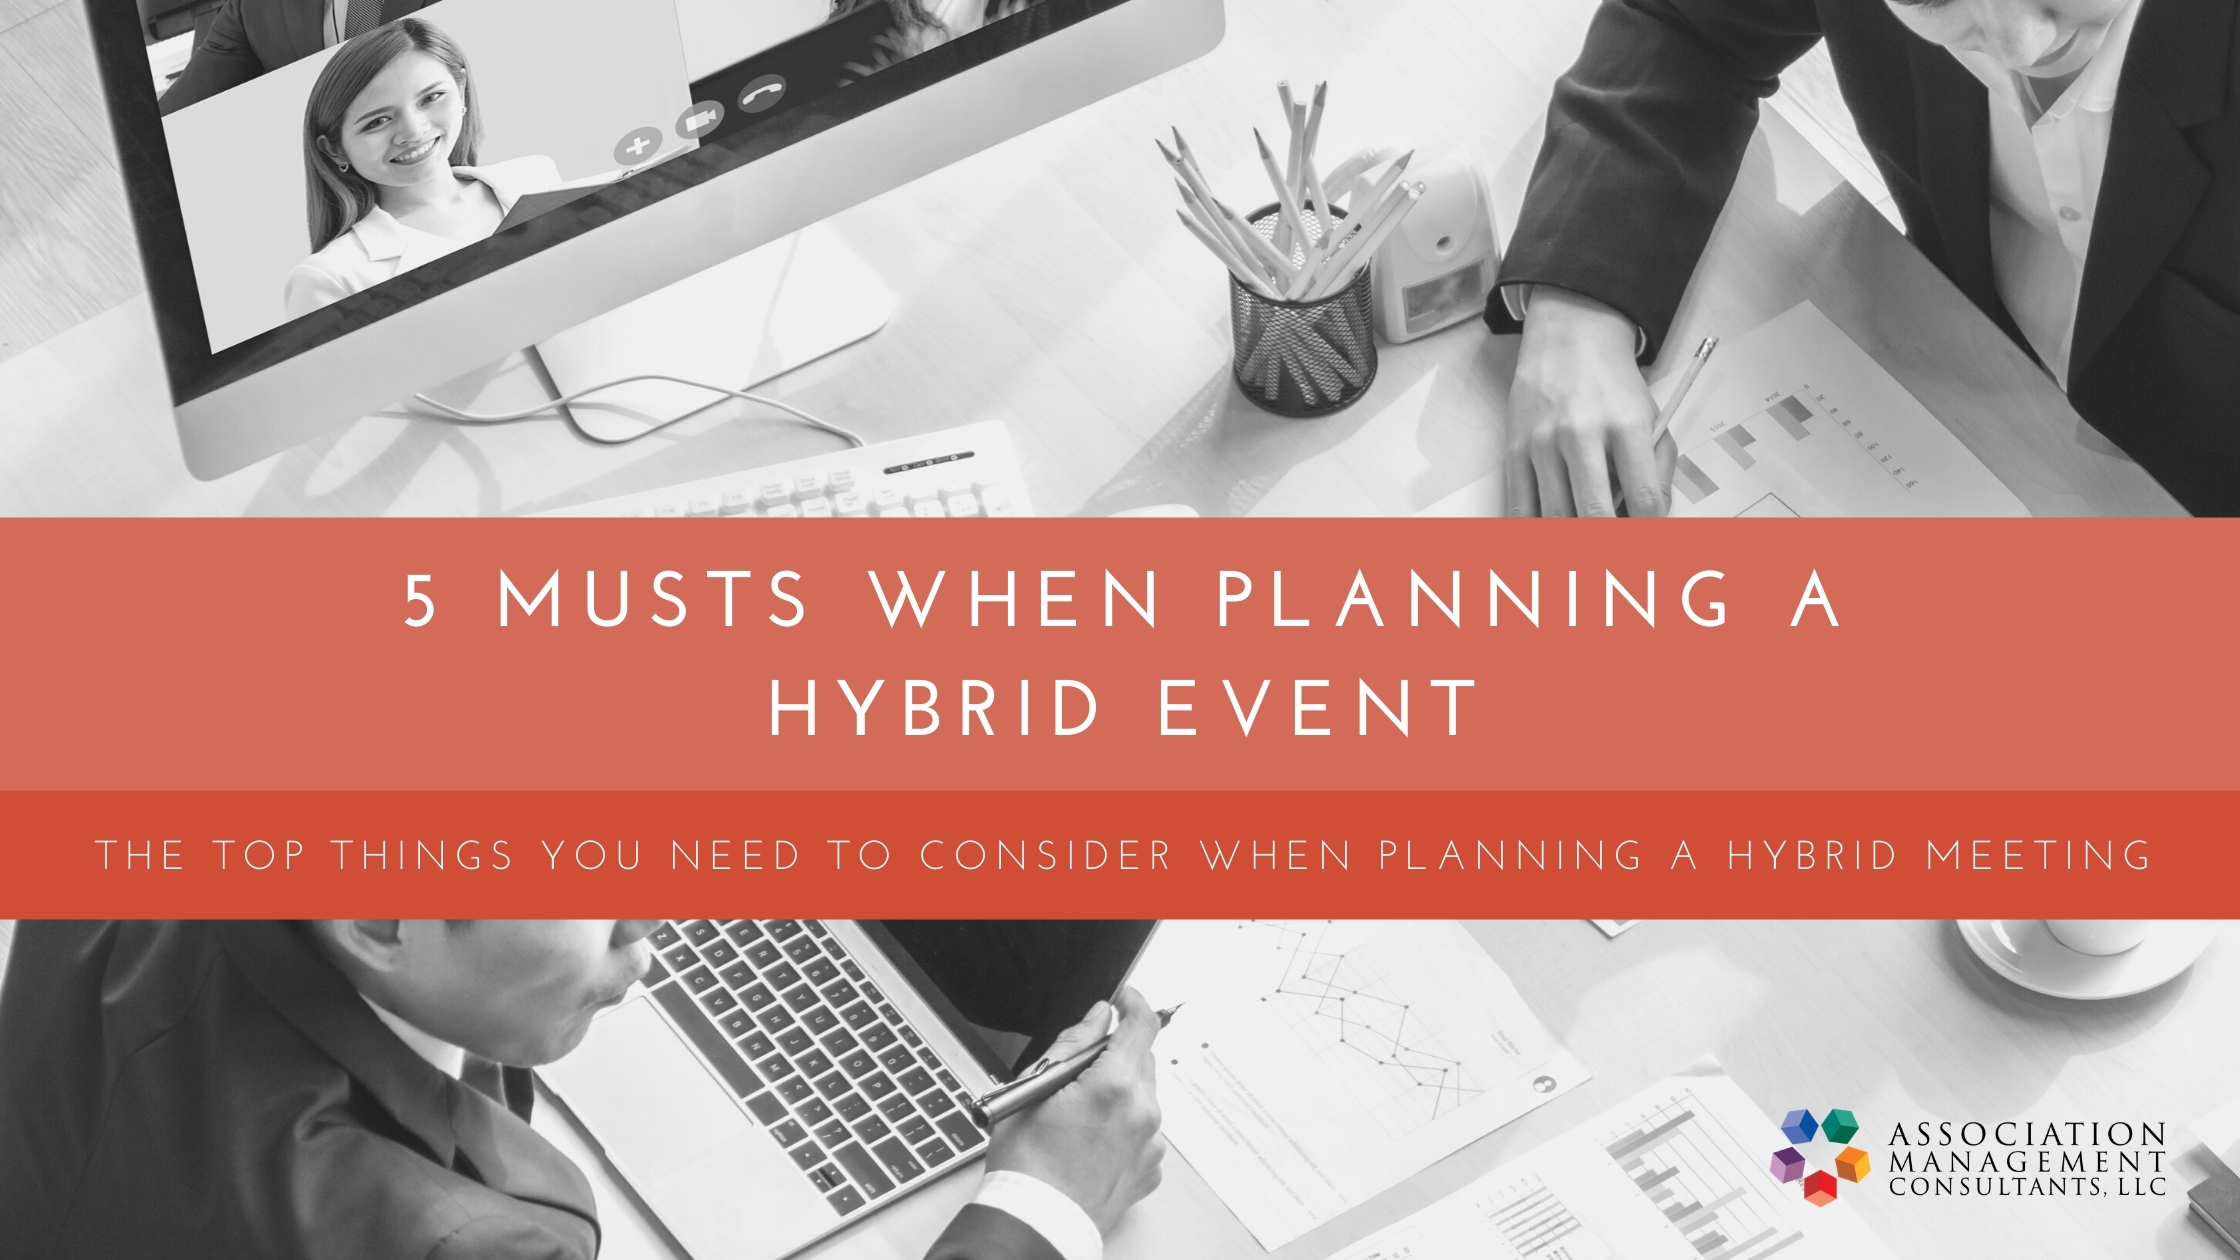 5 Musts When Planning a Hybrid Event